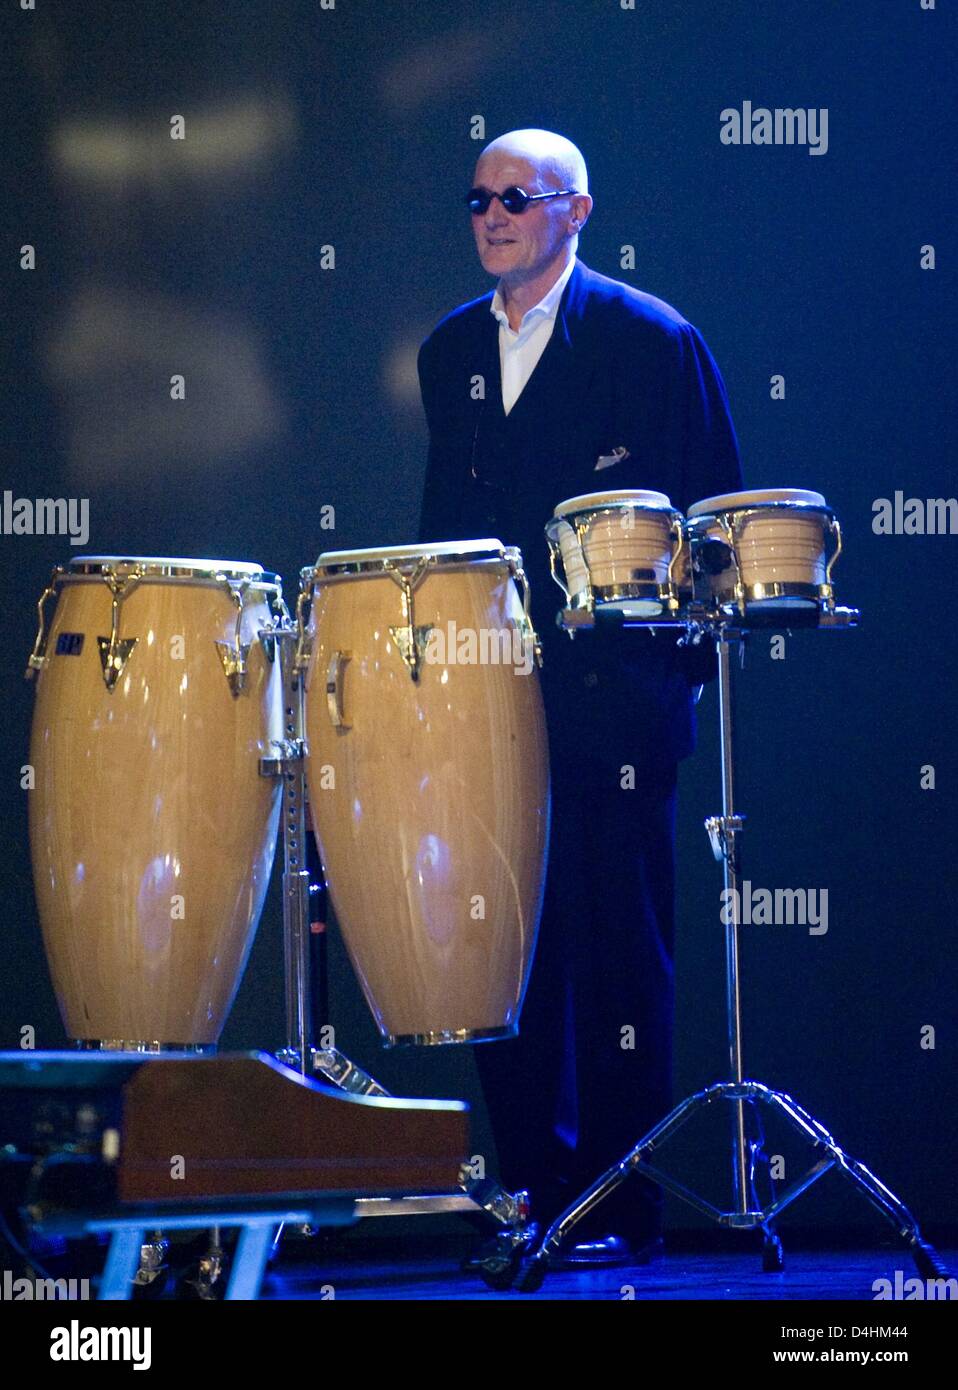 Drummer Ray Cooper performs during the German TV show ?Wetten, dass...?? (literally: I bet, that...) at Baden-Arena in Offenburg, Germany, 24 January 2009. The last time the TV show took place in Offenburg was in 1995. After the conferment of Germany?s Bambi awards in November 2008, the TV show is the second media mega event for Offenburg within just a few weeks. Photo: Patrick See Stock Photo